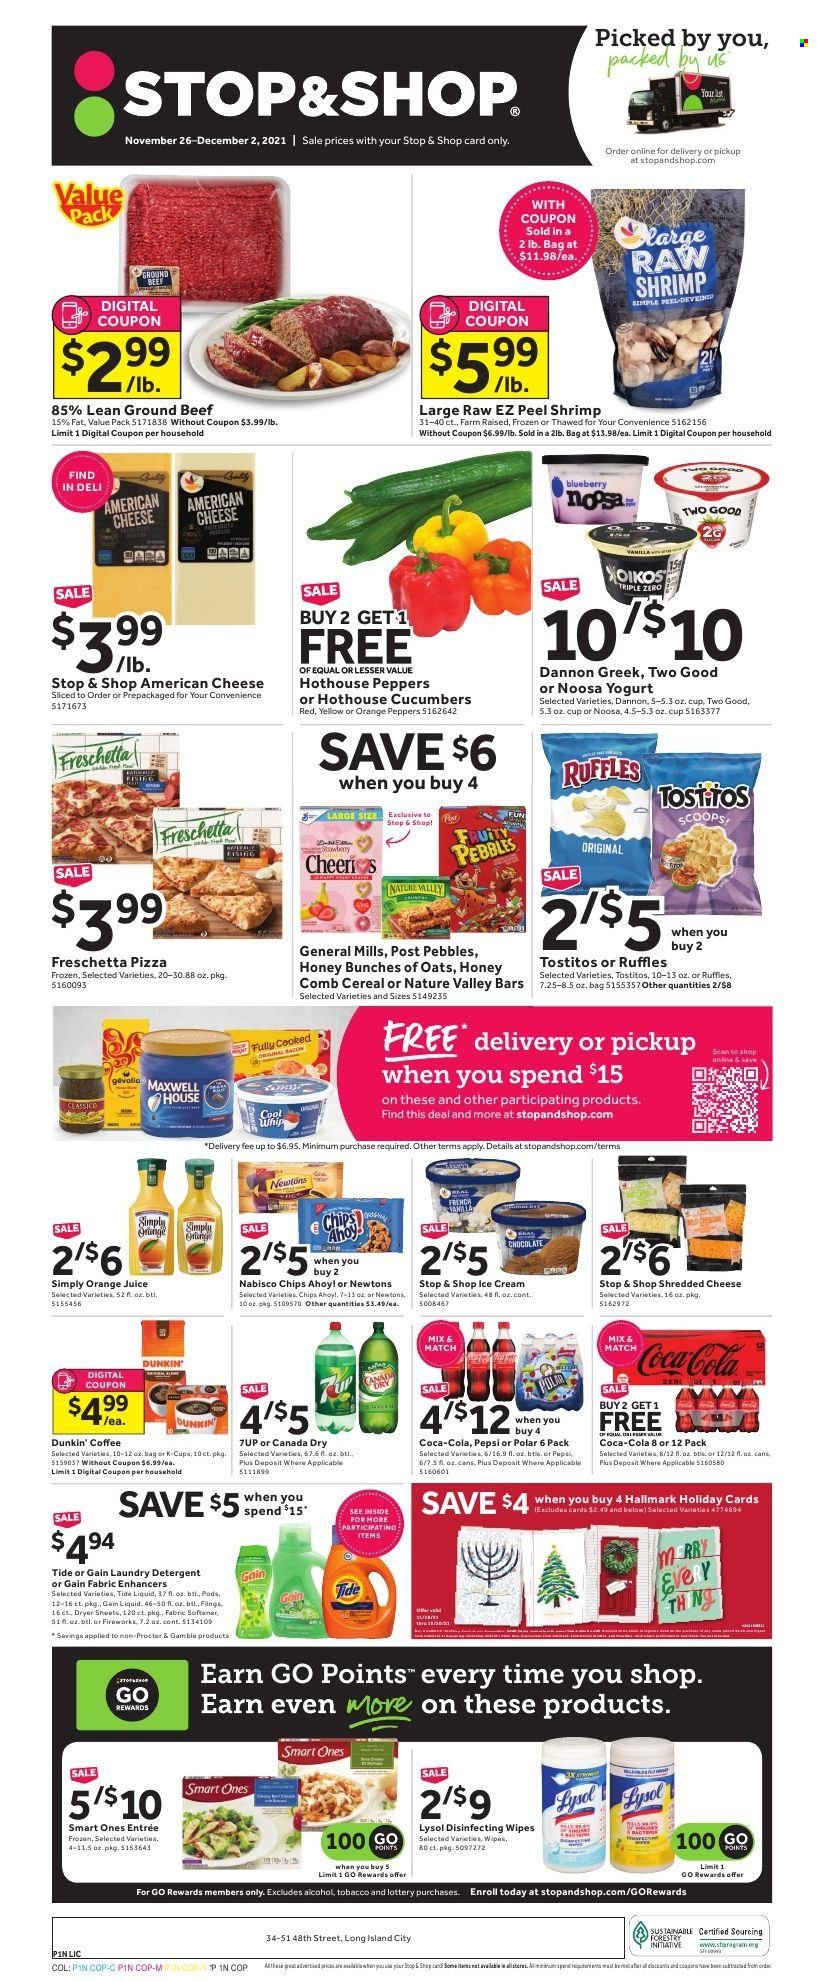 thumbnail - Stop & Shop Flyer - 11/26/2021 - 12/02/2021 - Sales products - cucumber, peppers, beef meat, ground beef, shrimps, pizza, american cheese, shredded cheese, yoghurt, Dannon, Cool Whip, chocolate, Ruffles, Tostitos, cereals, Fruity Pebbles, Nature Valley, Canada Dry, Coca-Cola, Pepsi, orange juice, juice, 7UP, Maxwell House, coffee, coffee capsules, K-Cups, Ron Pelicano, wipes, Gain, Tide, laundry detergent, dryer sheets, comb, pin. Page 1.